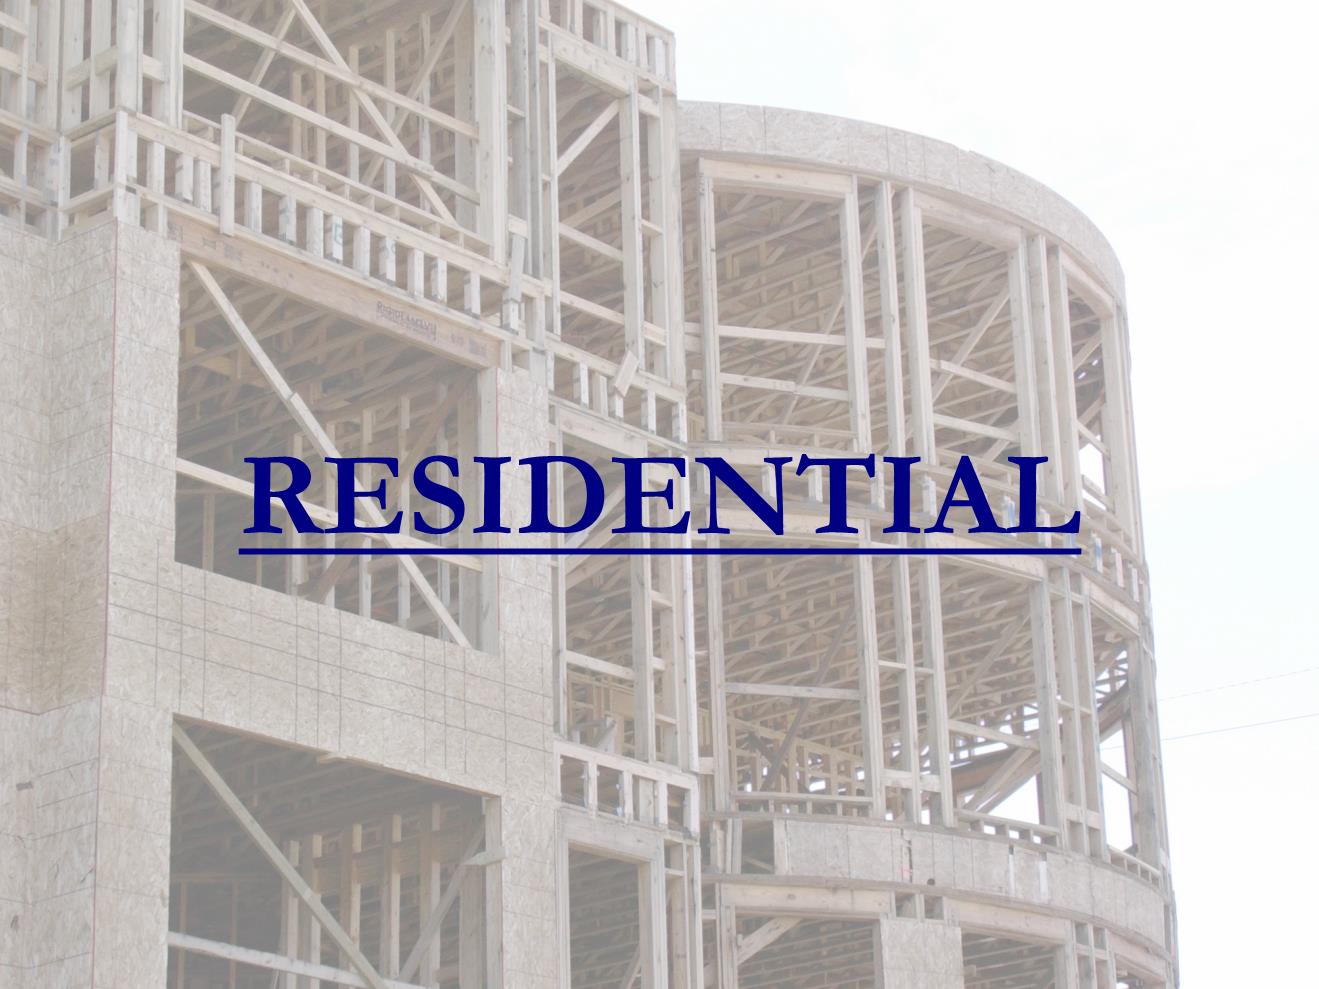 Residential - typical services - text.jpg